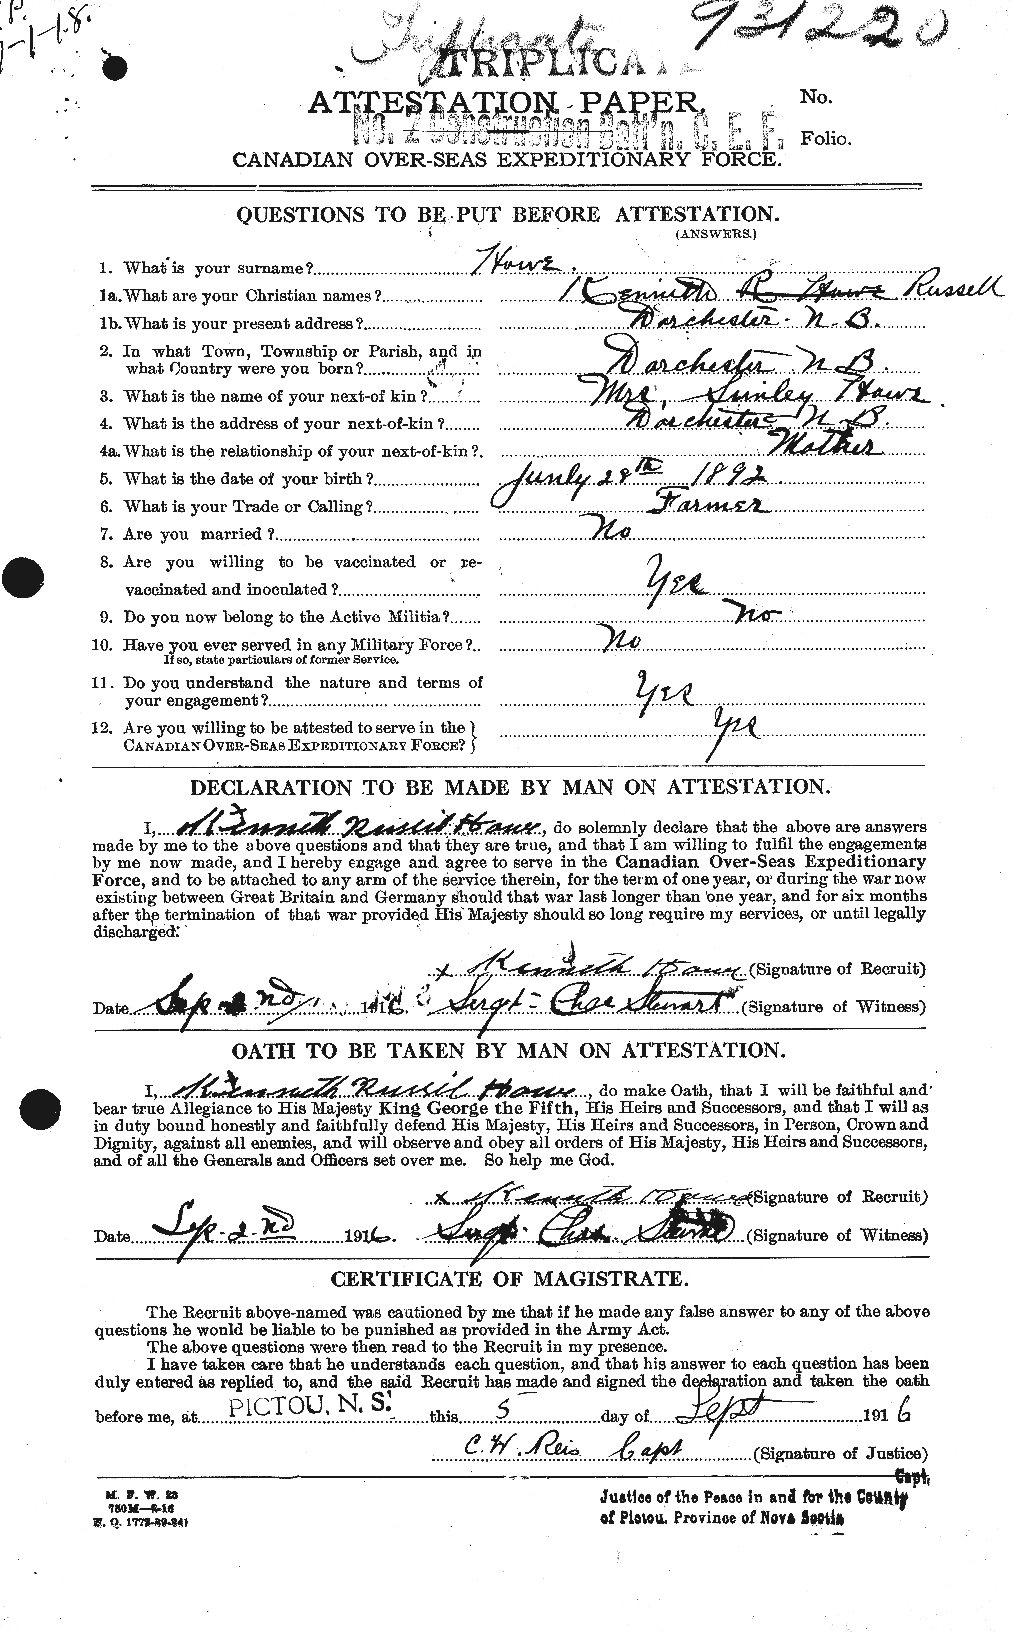 Personnel Records of the First World War - CEF 402064a